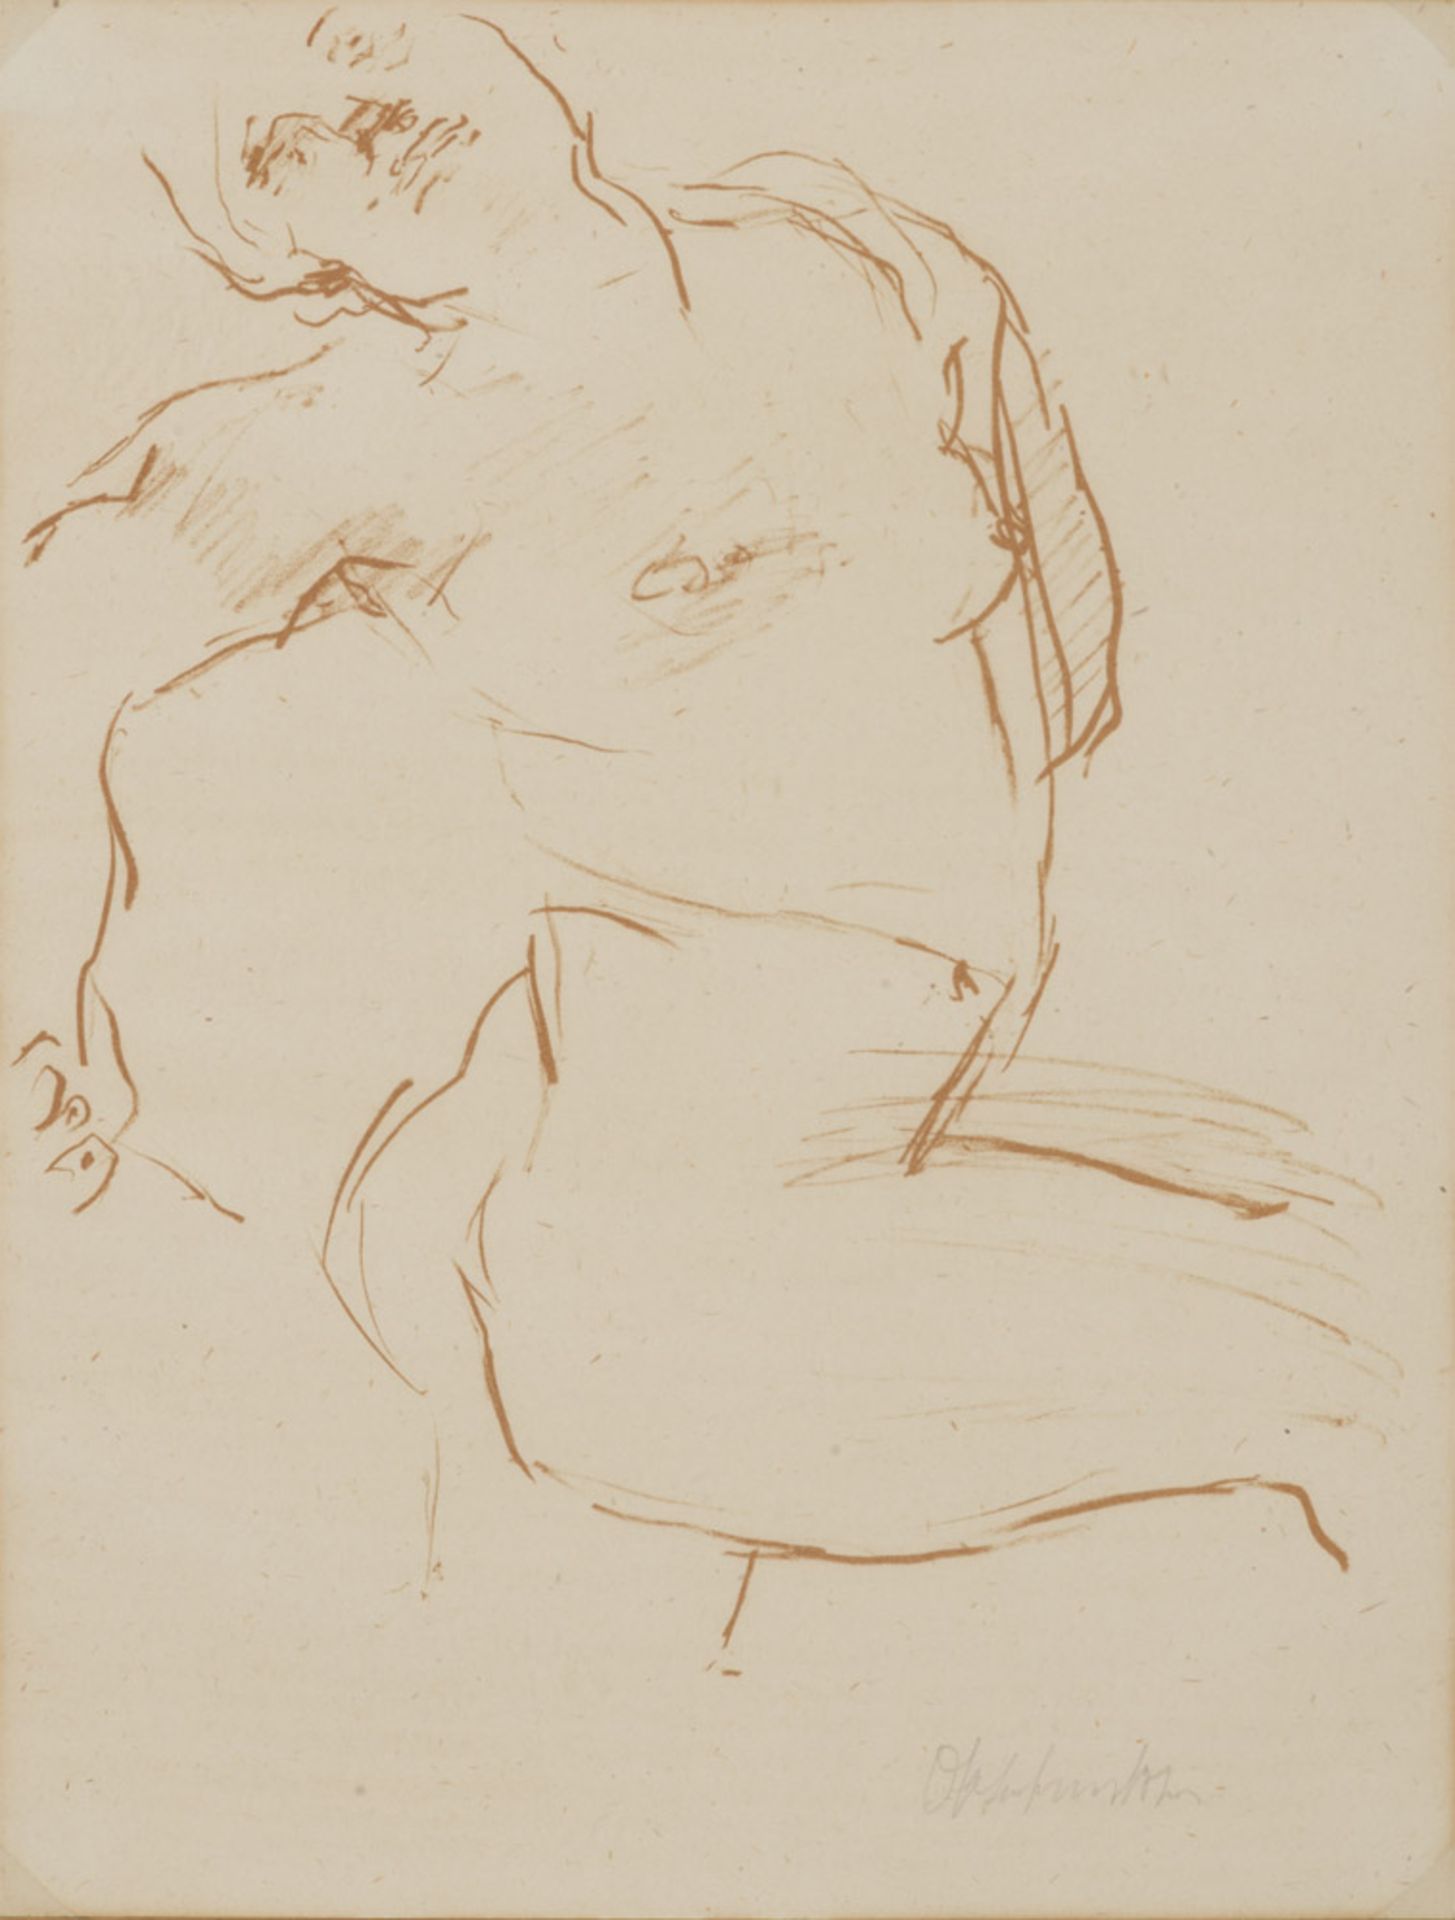 PAINTER OF THE 20TH CENTURY Male nude Pencil on paper, cm. 24,5 x 18,5 Illegible signature in low to